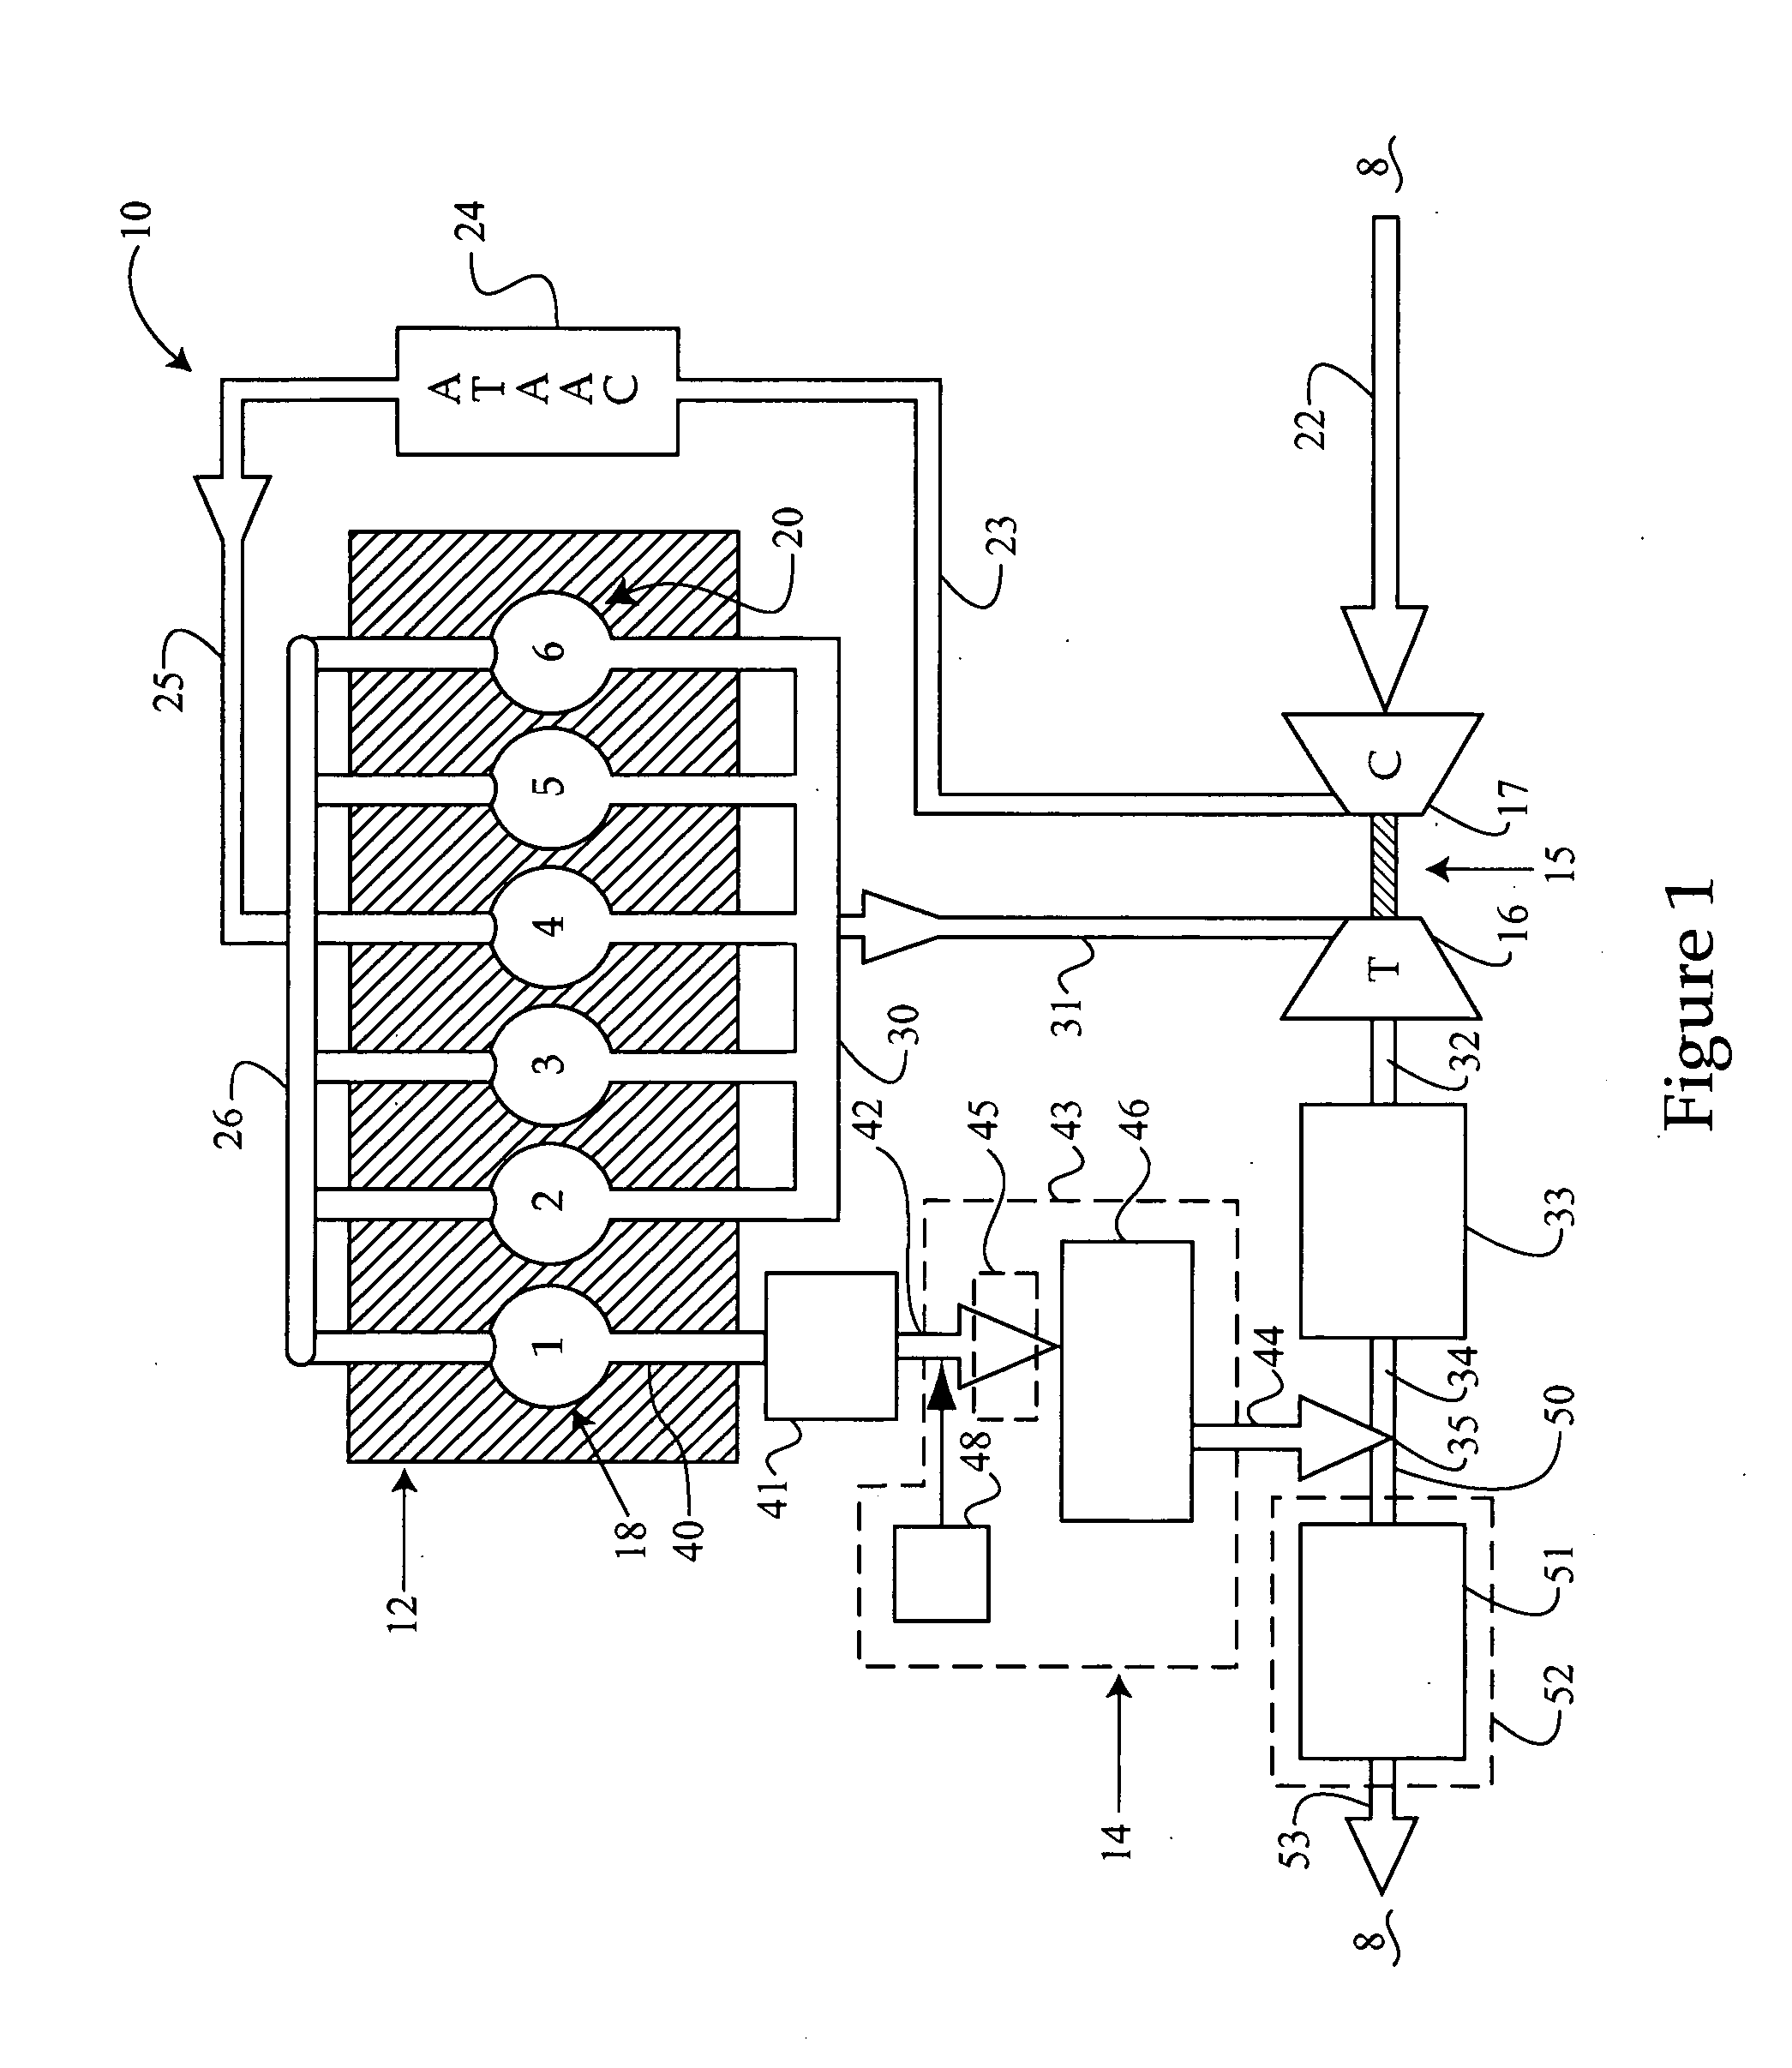 Engine system arrangement with on-board ammonia production and exhaust after treatment system